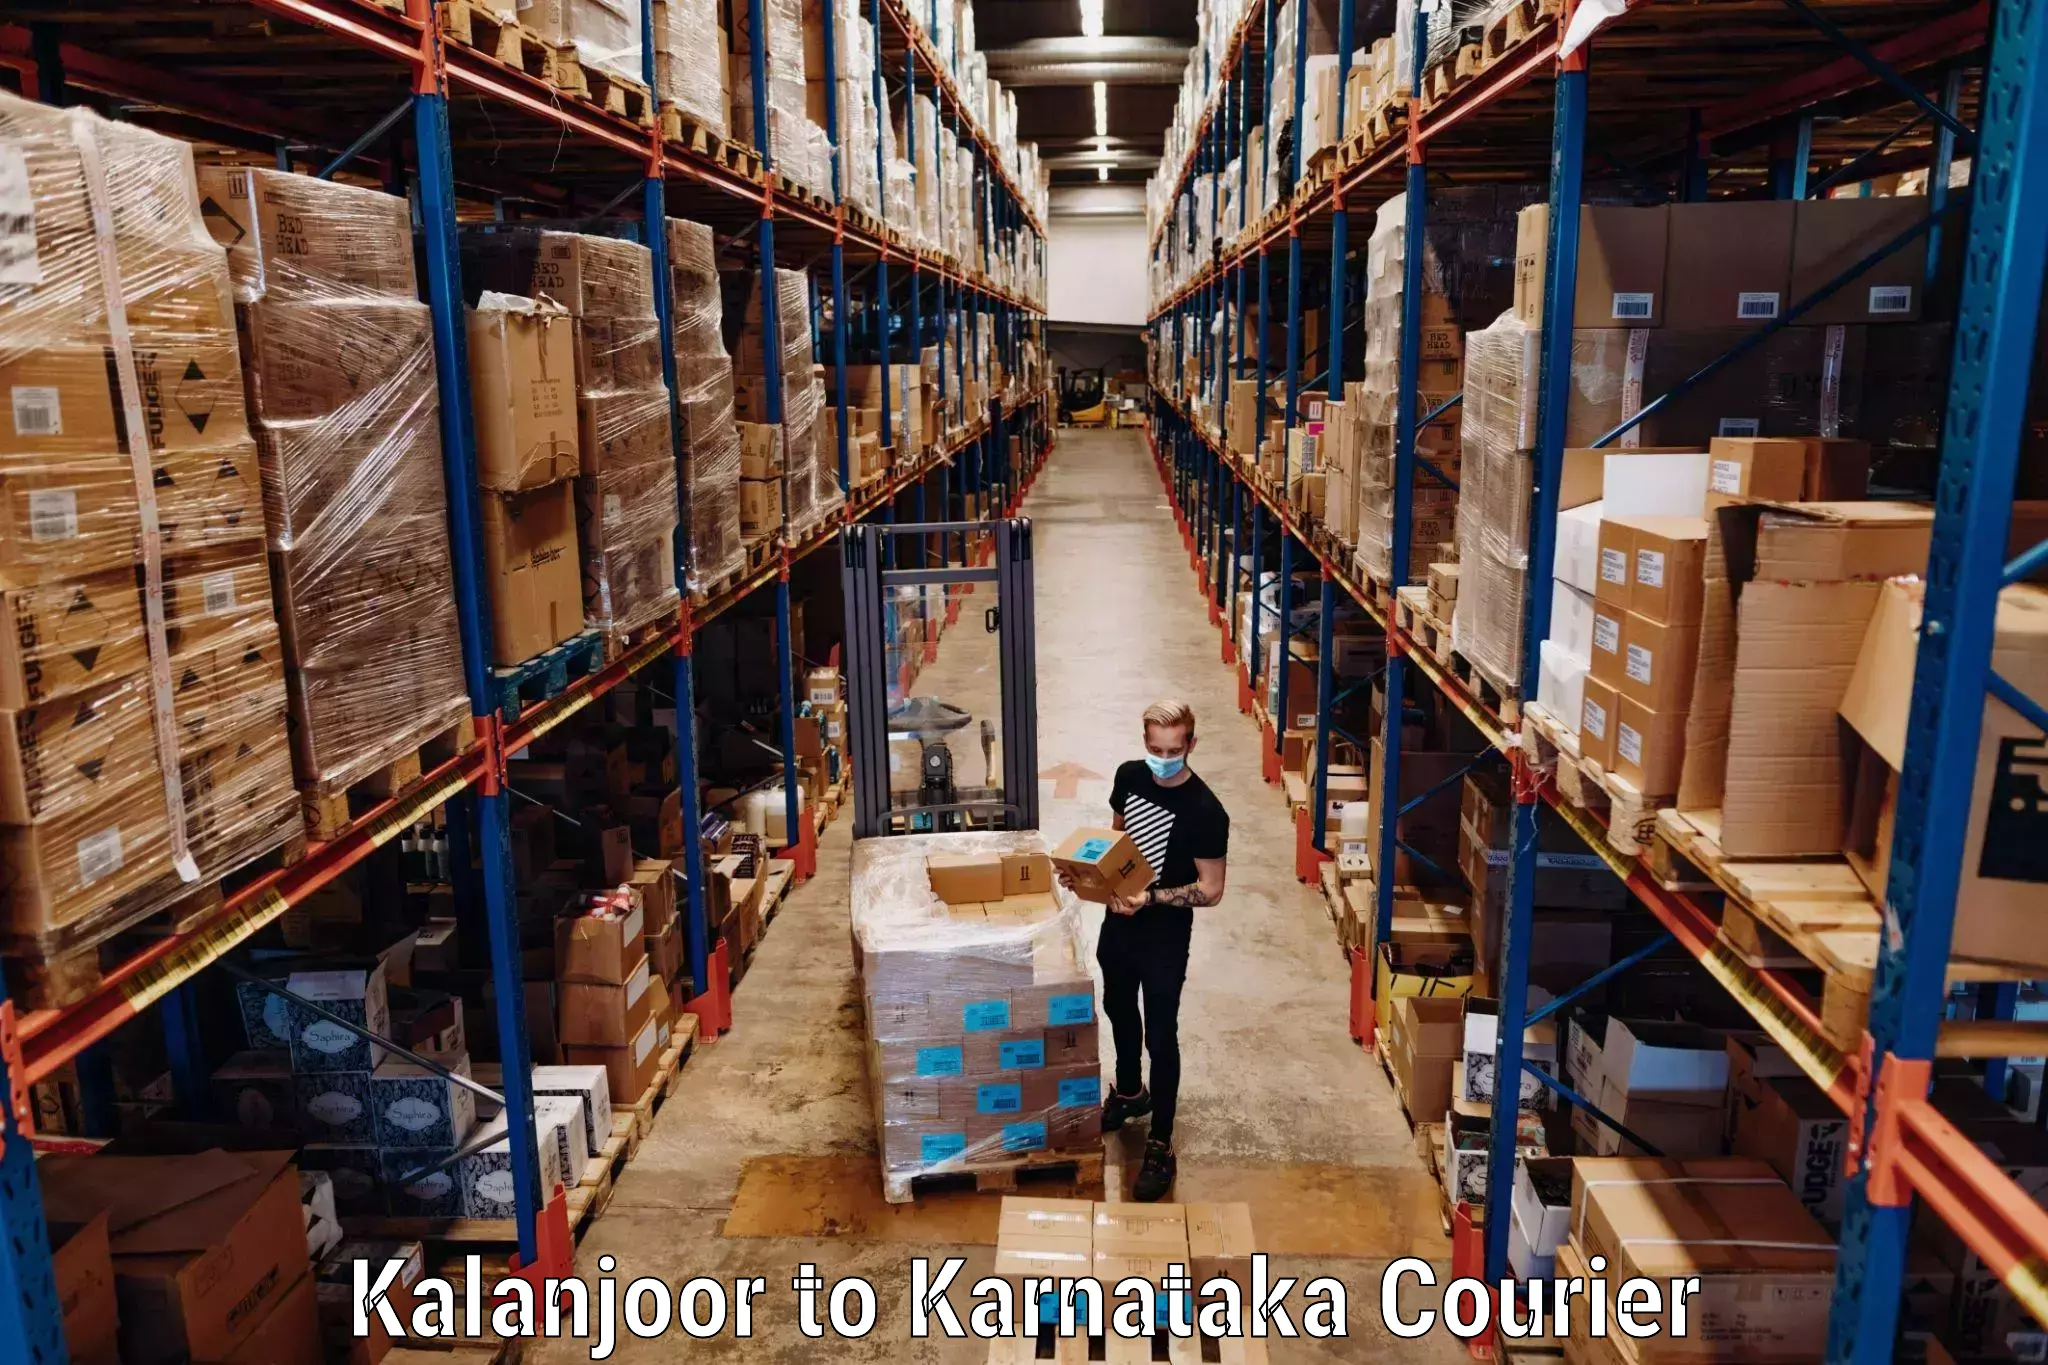 Online luggage shipping booking in Kalanjoor to Shorapur